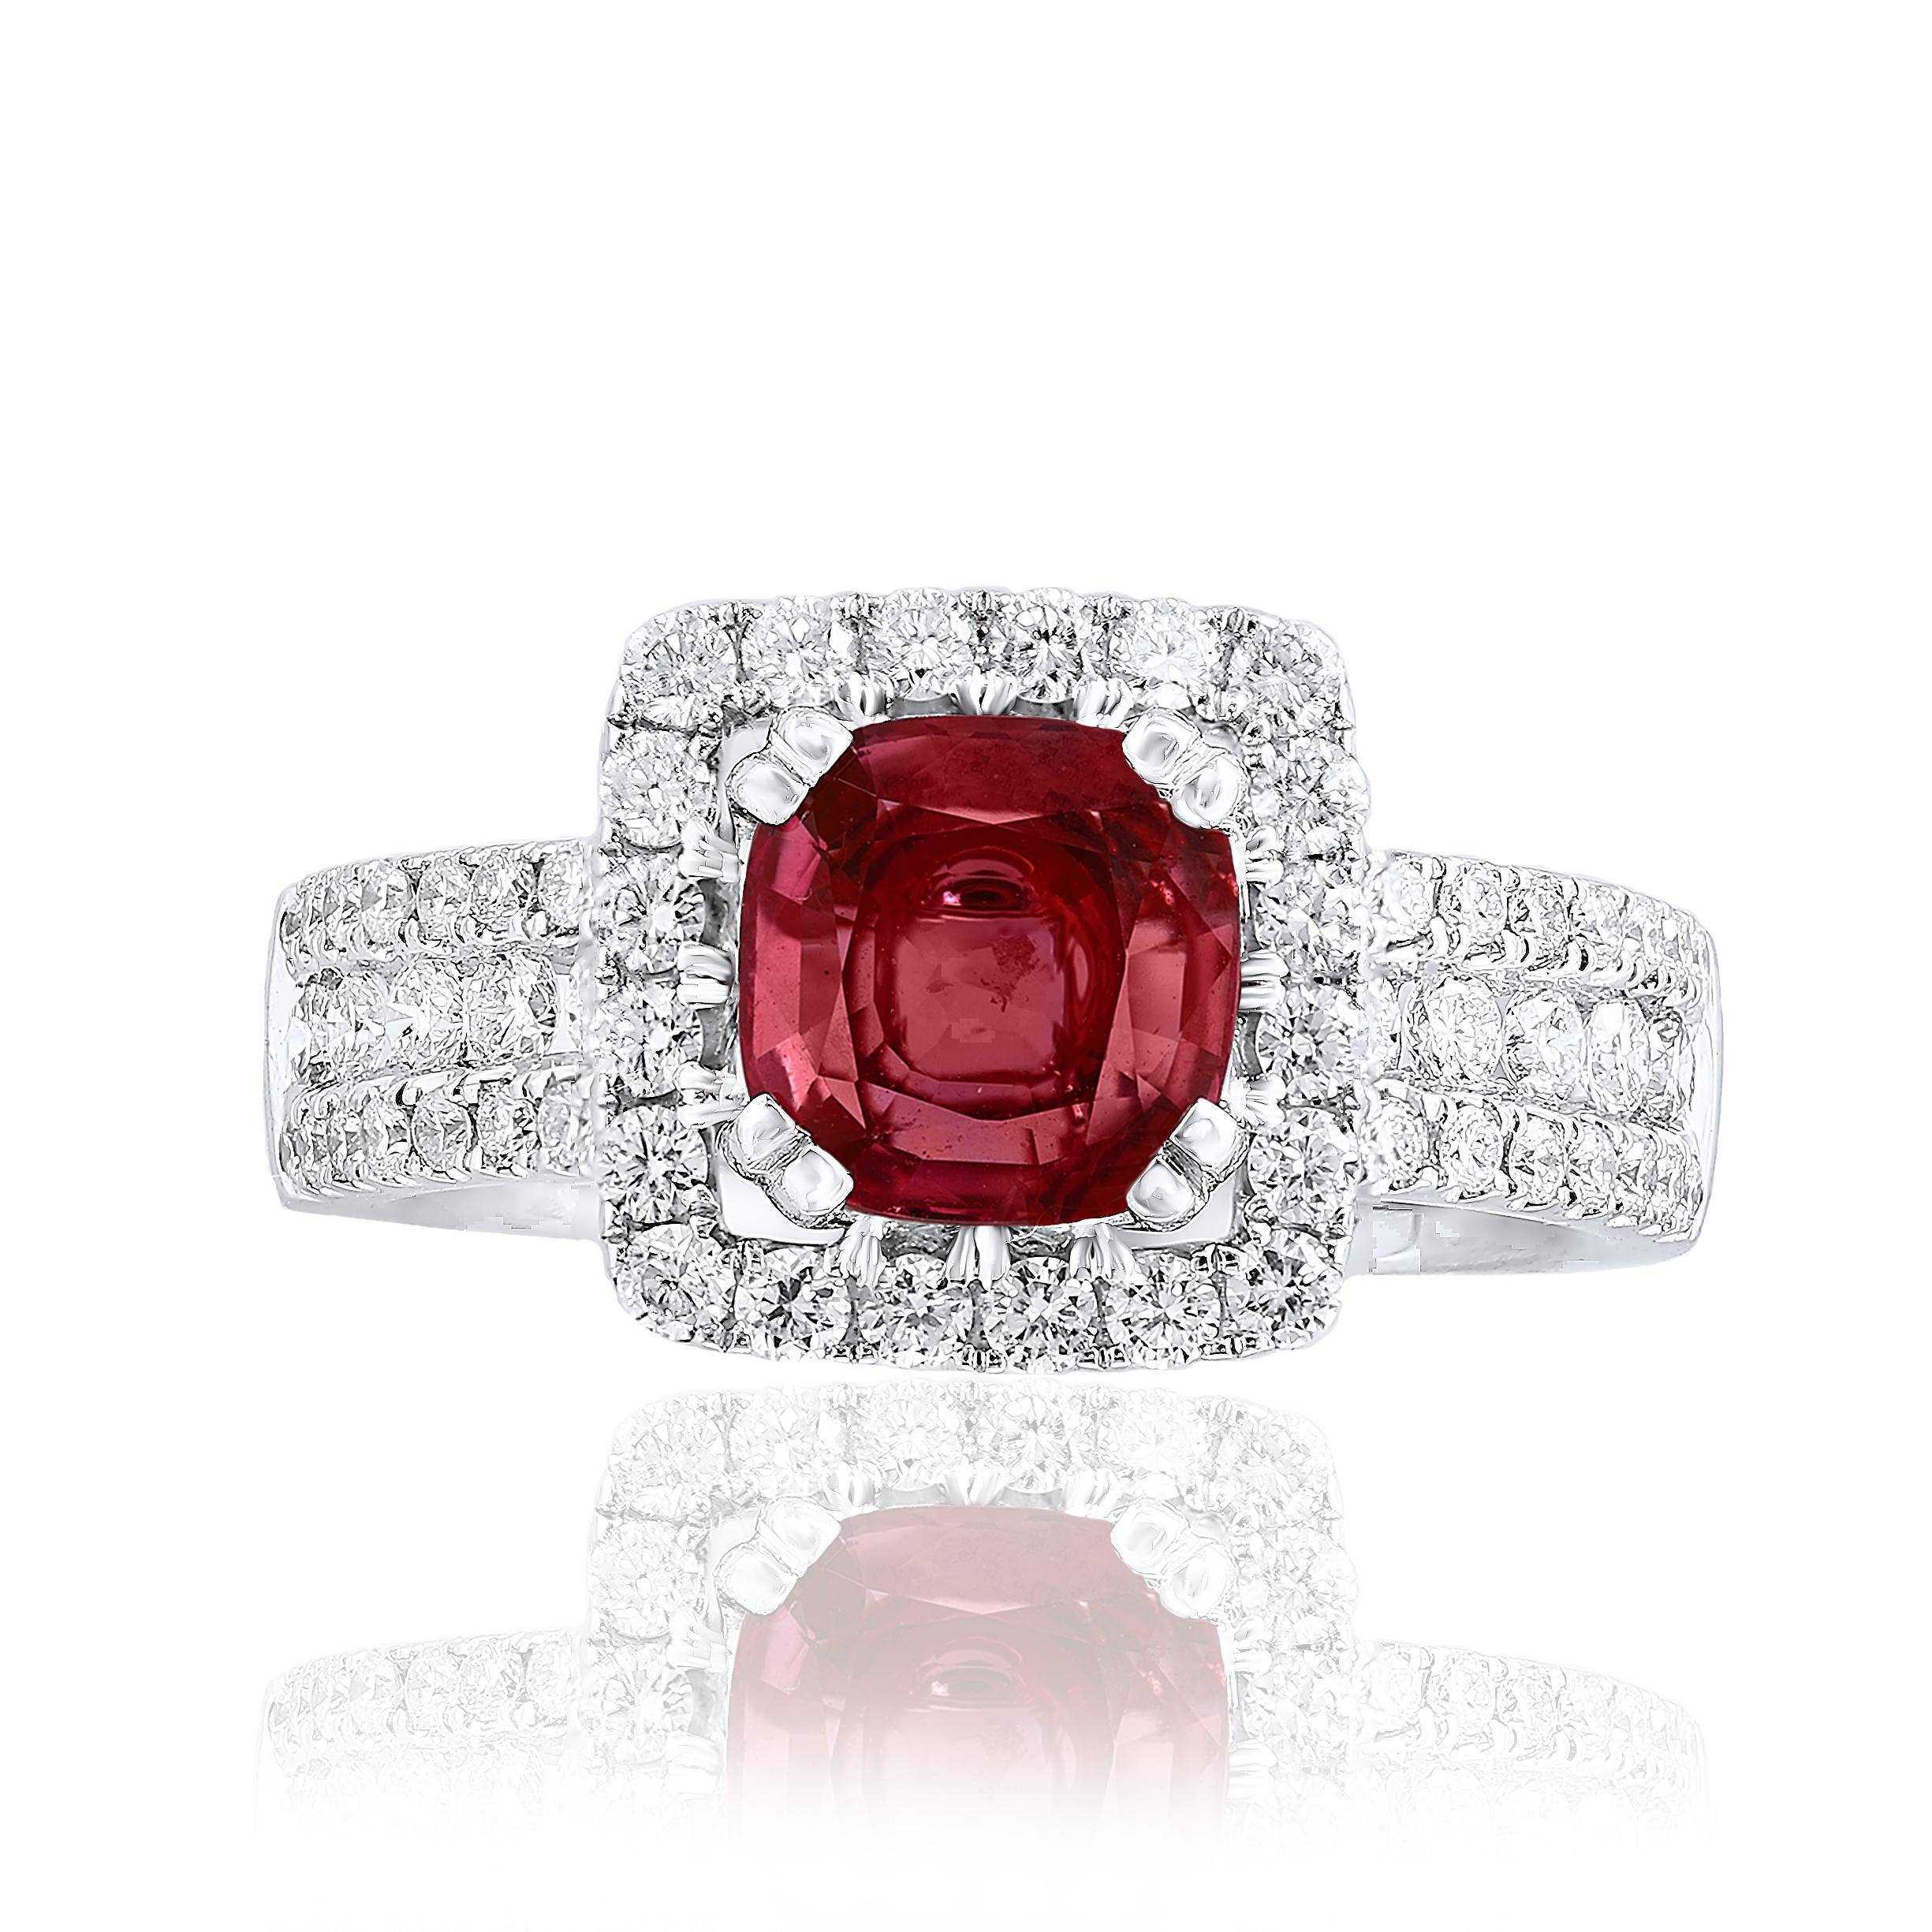 Features a beautiful 1.45 carat Ruby at the center. Framed by 1 row of brilliant round diamonds. Diamonds also set halfway all over the shank of the ring. The weight of the 68 diamonds is 0.96 carats. Made in 18k white gold. Size 6.5 US